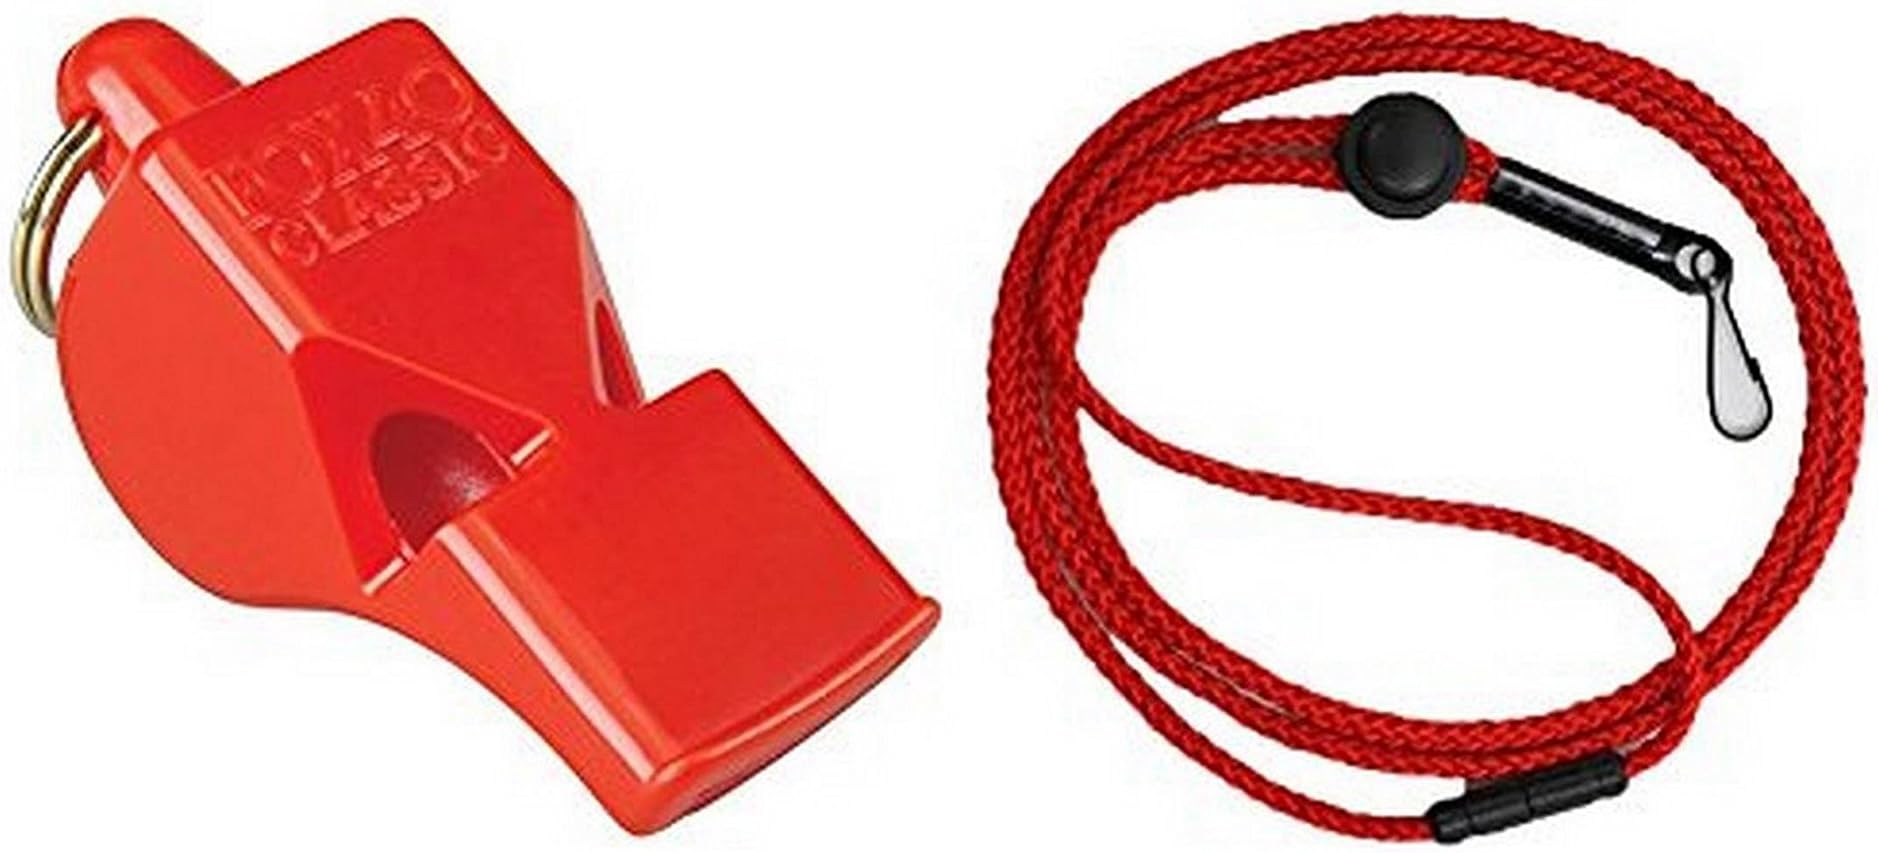 fox 40 classic official whistle with break away lanyard red  ?fox 40 b00lb9b206